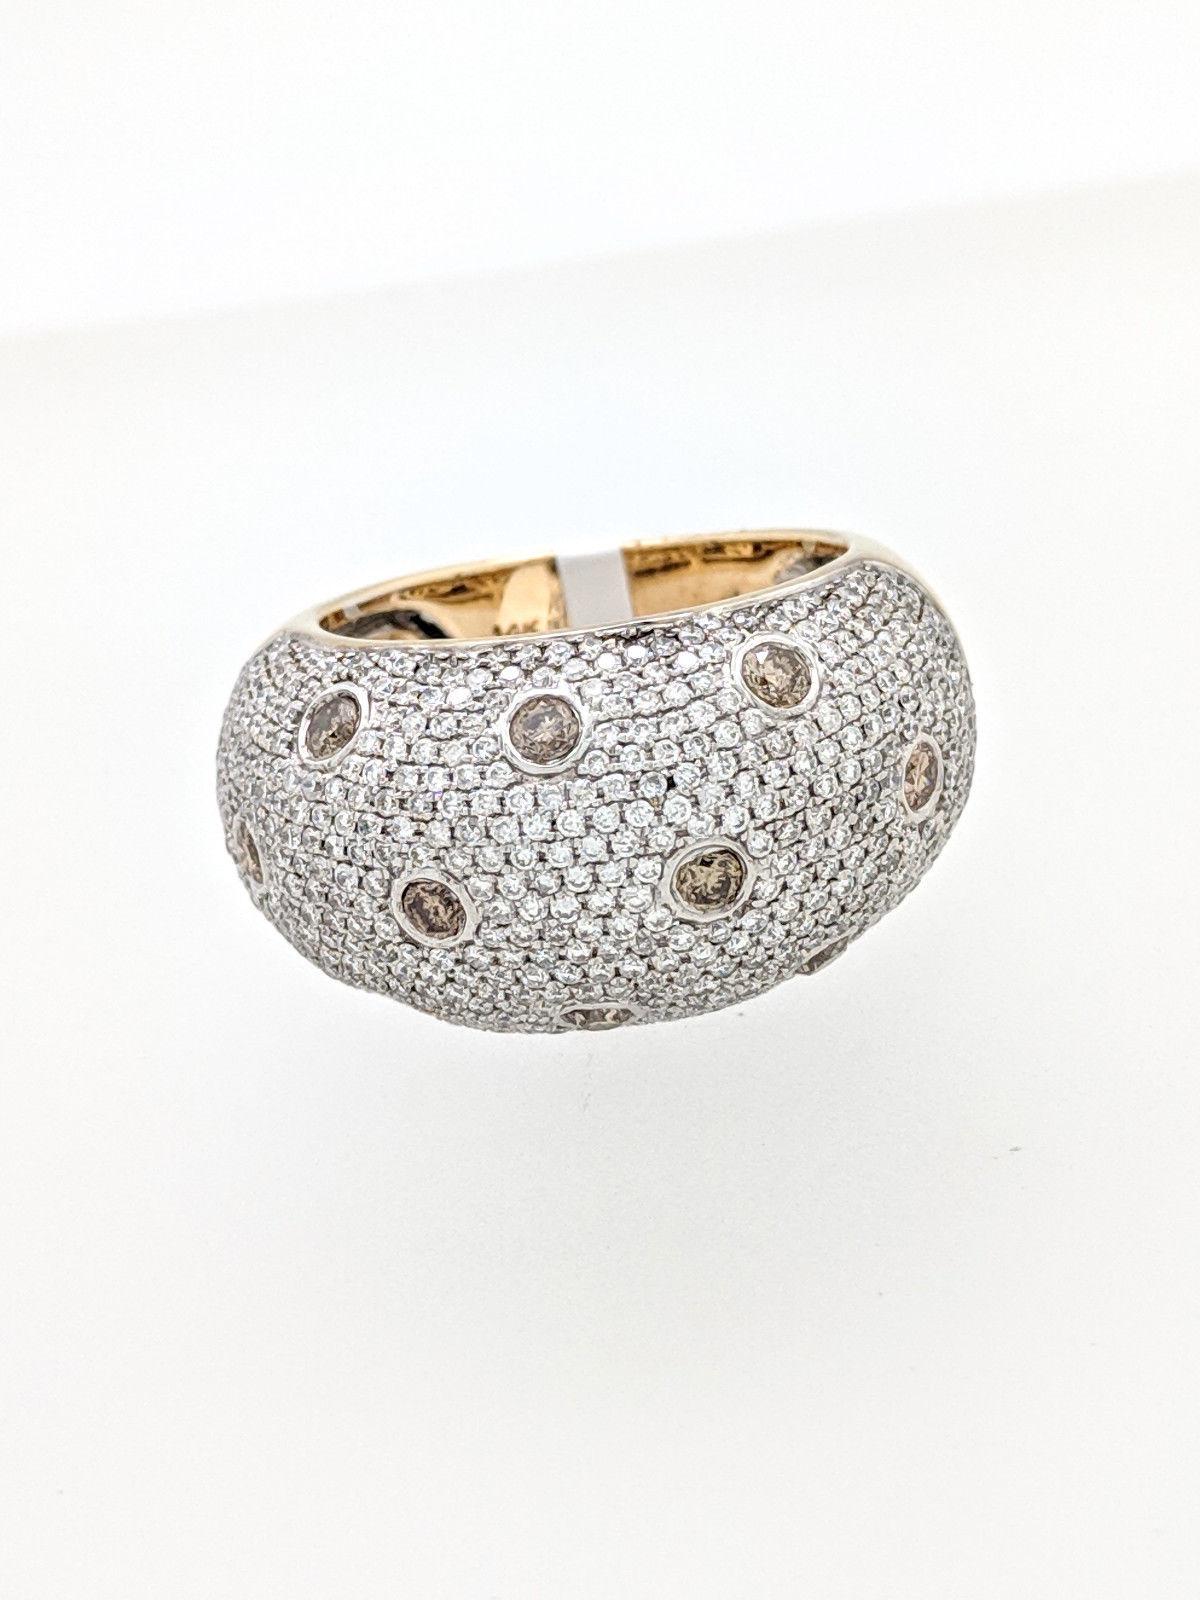 14 Karat White Gold 2.05 Carat White and Champagne Pave Diamond Dome Ring In Good Condition For Sale In Gainesville, FL